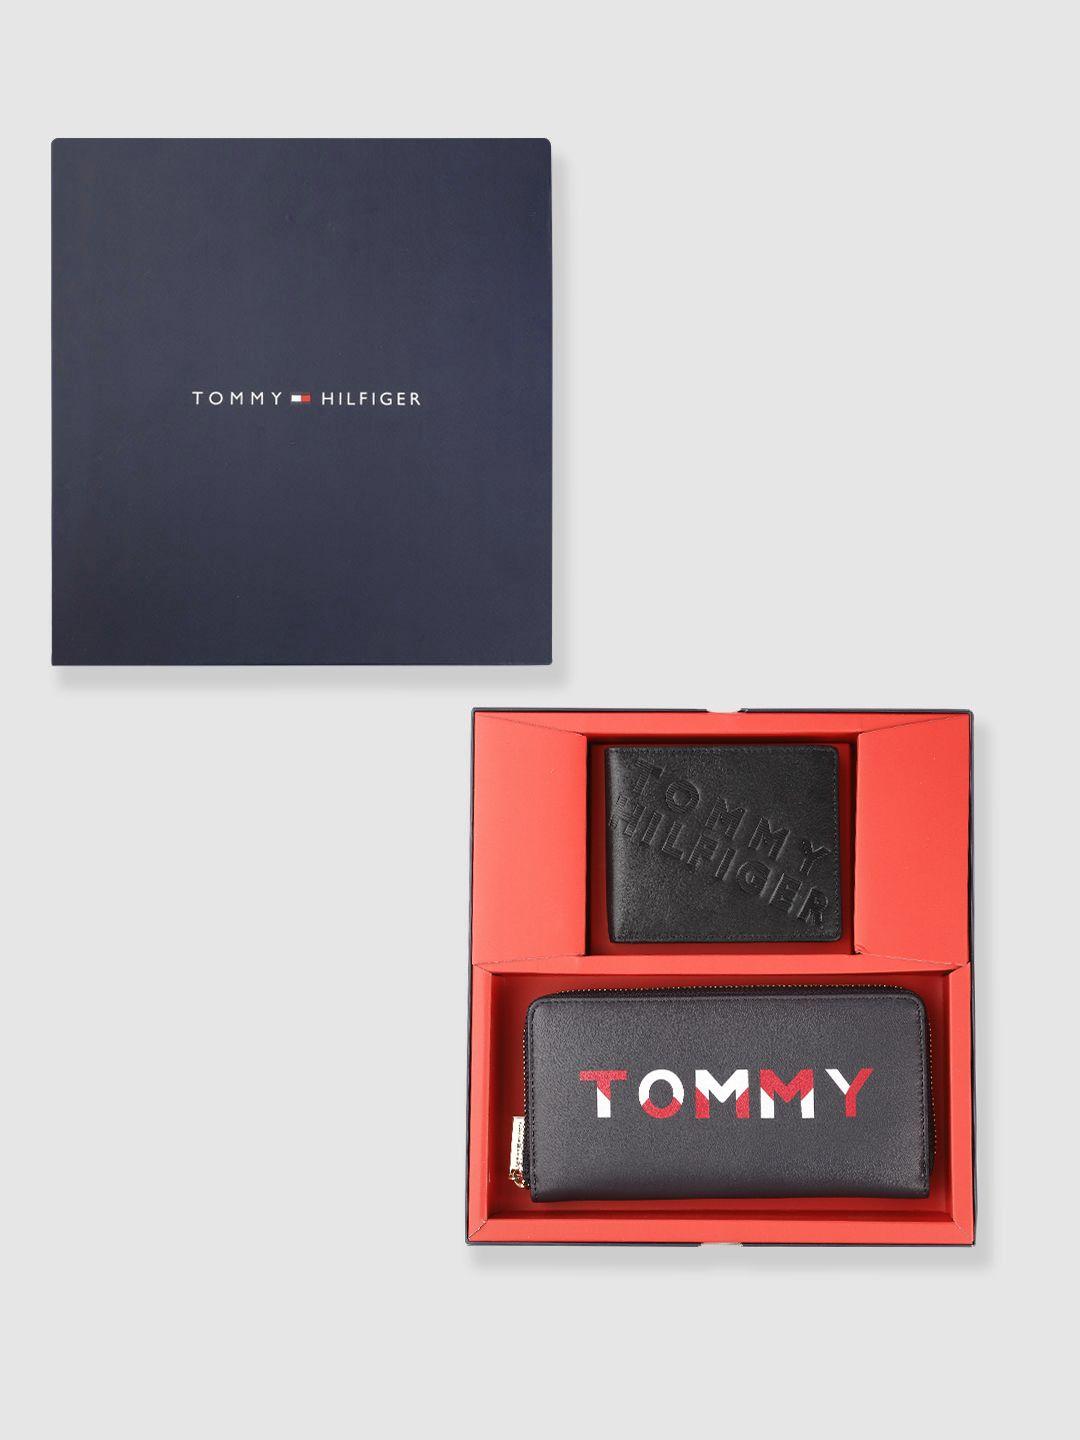 tommy hilfiger set of 2 navy blue wallets leather couples accessory gift set